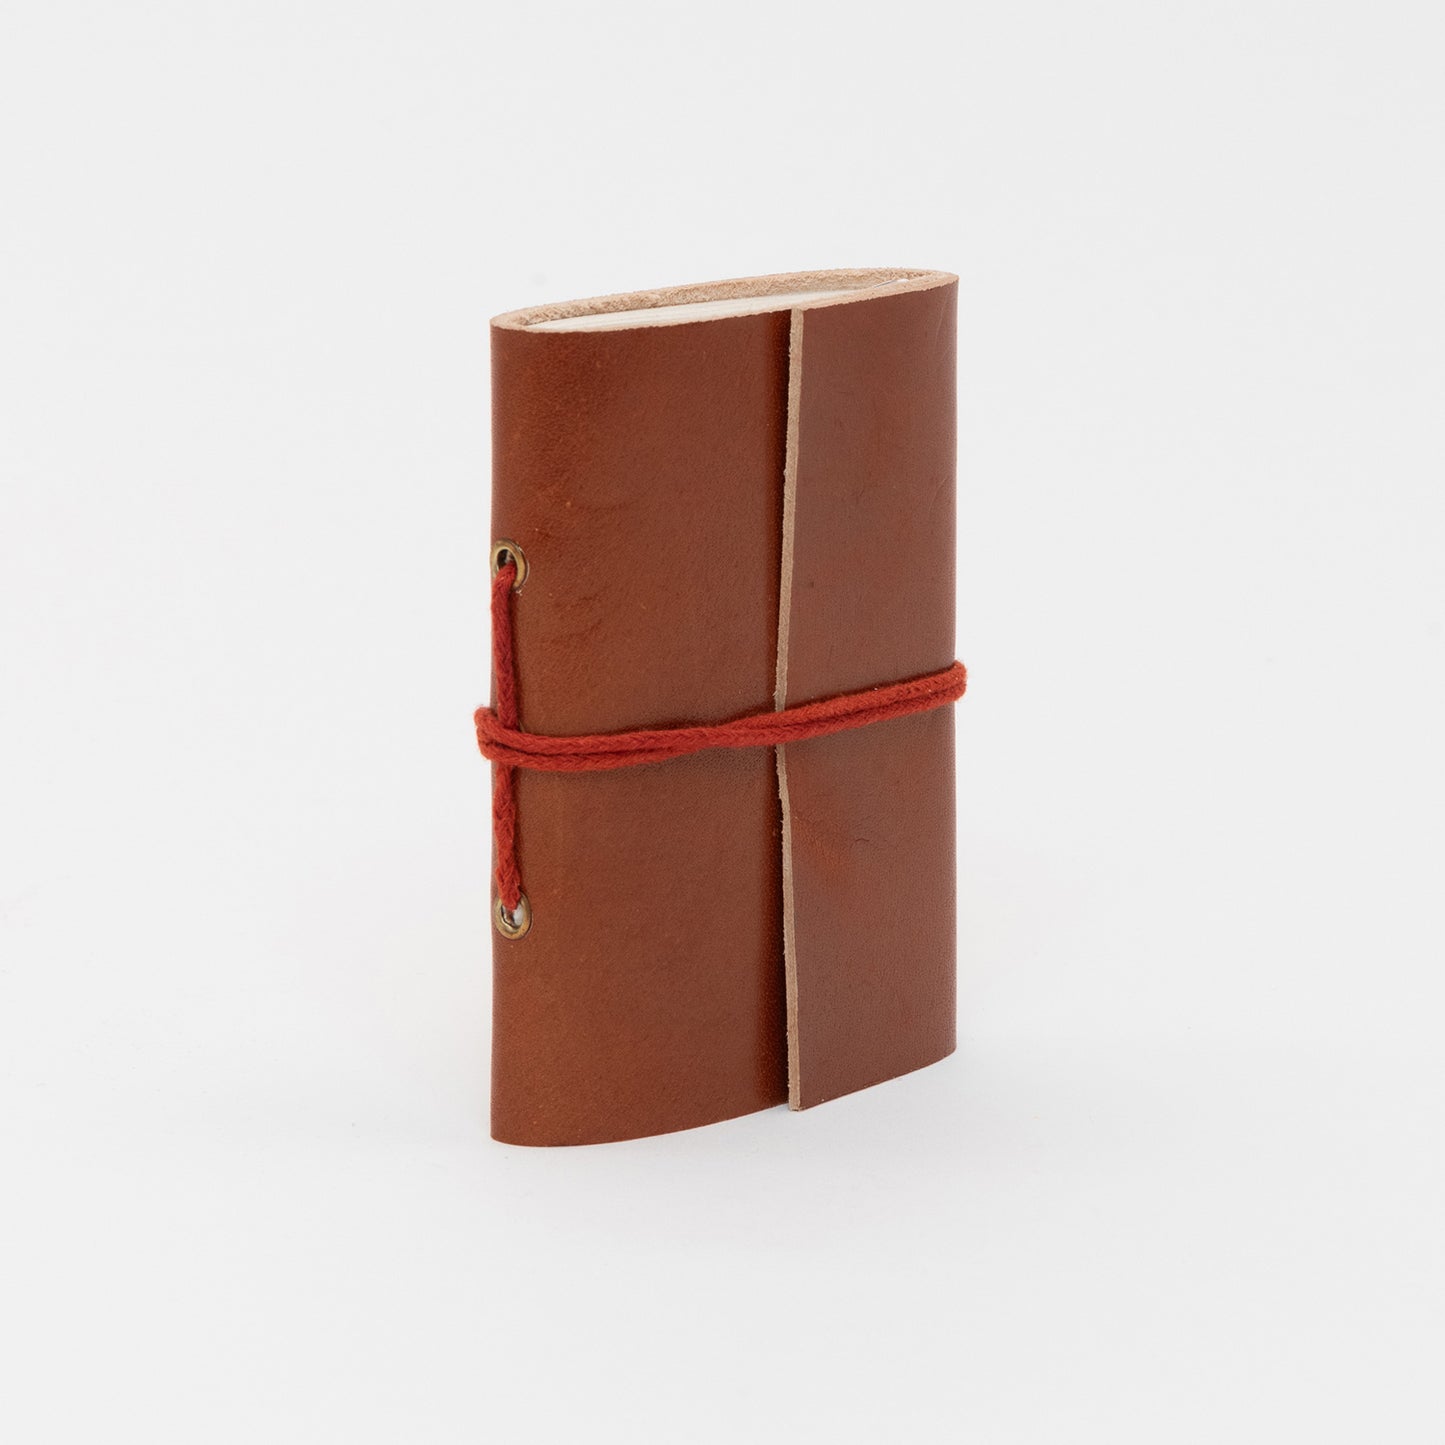 Side view of a tan leather bound journal with a leather tie around the middle.